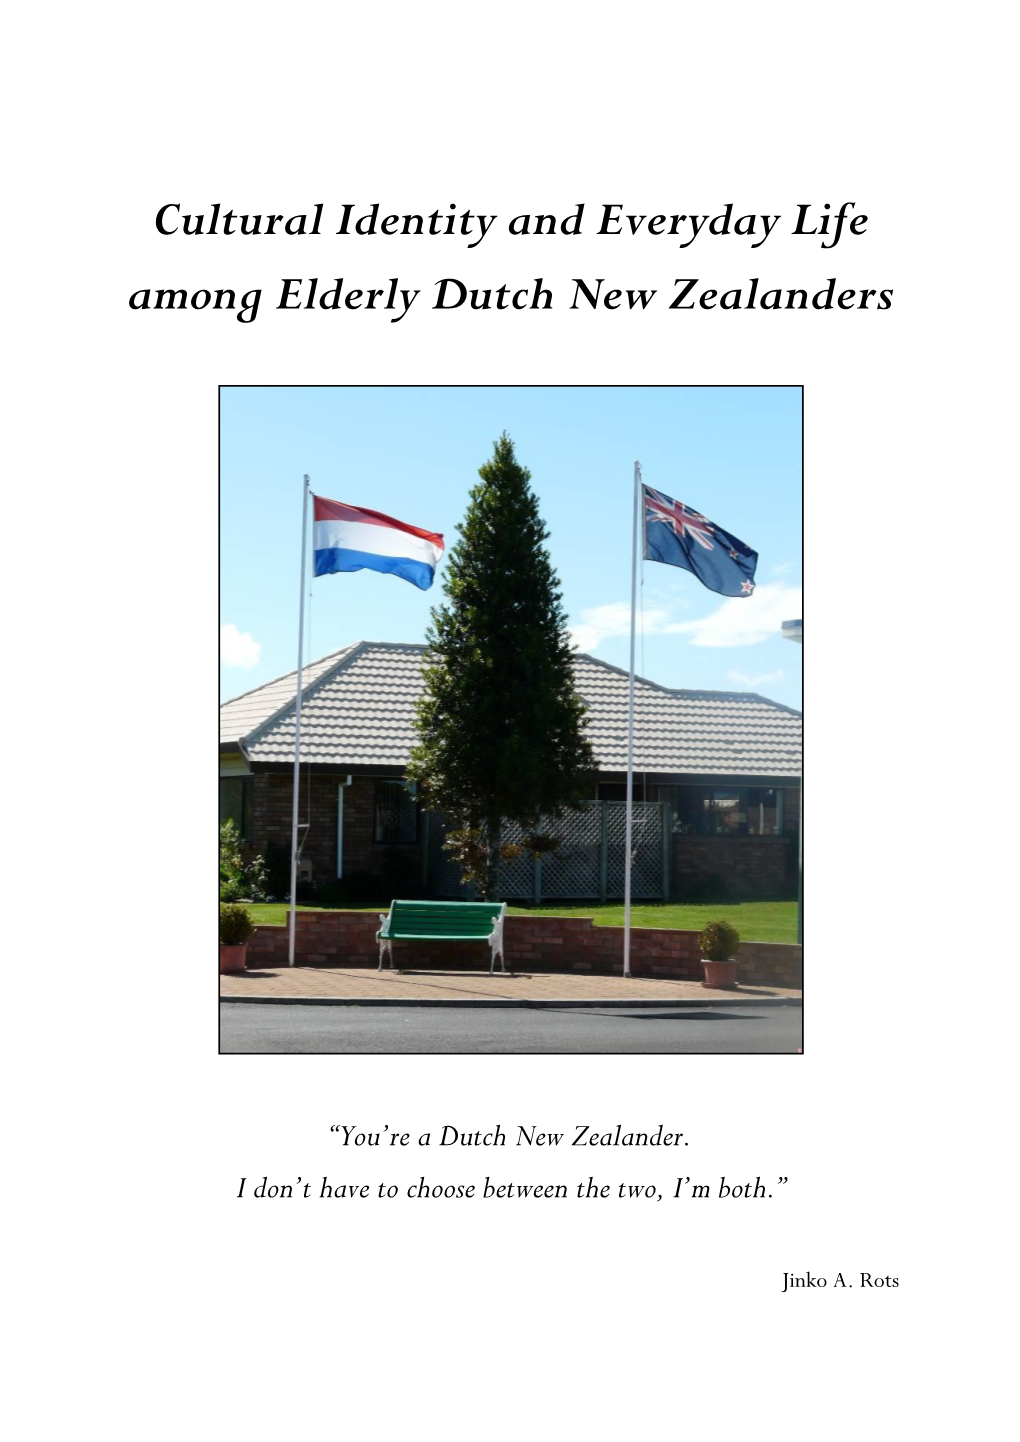 Cultural Identity and Everyday Life Among Elderly Dutch New Zealanders